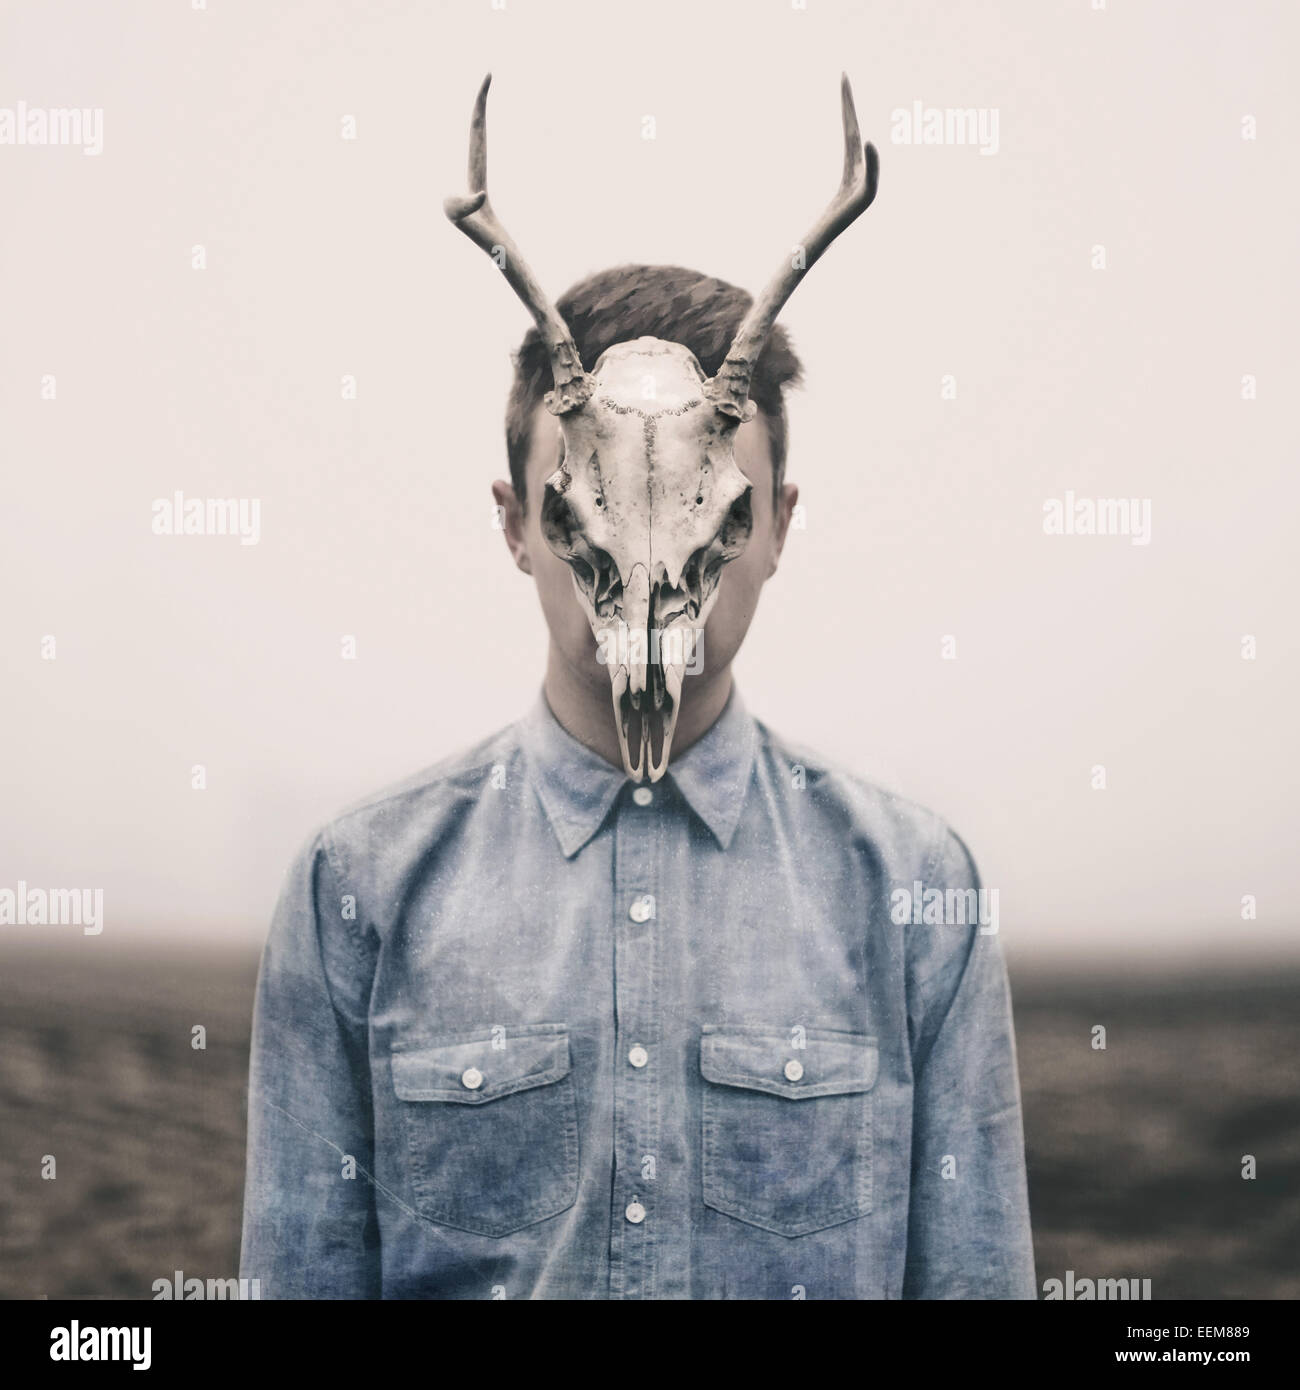 Man with animal skull on his face Stock Photo - Alamy